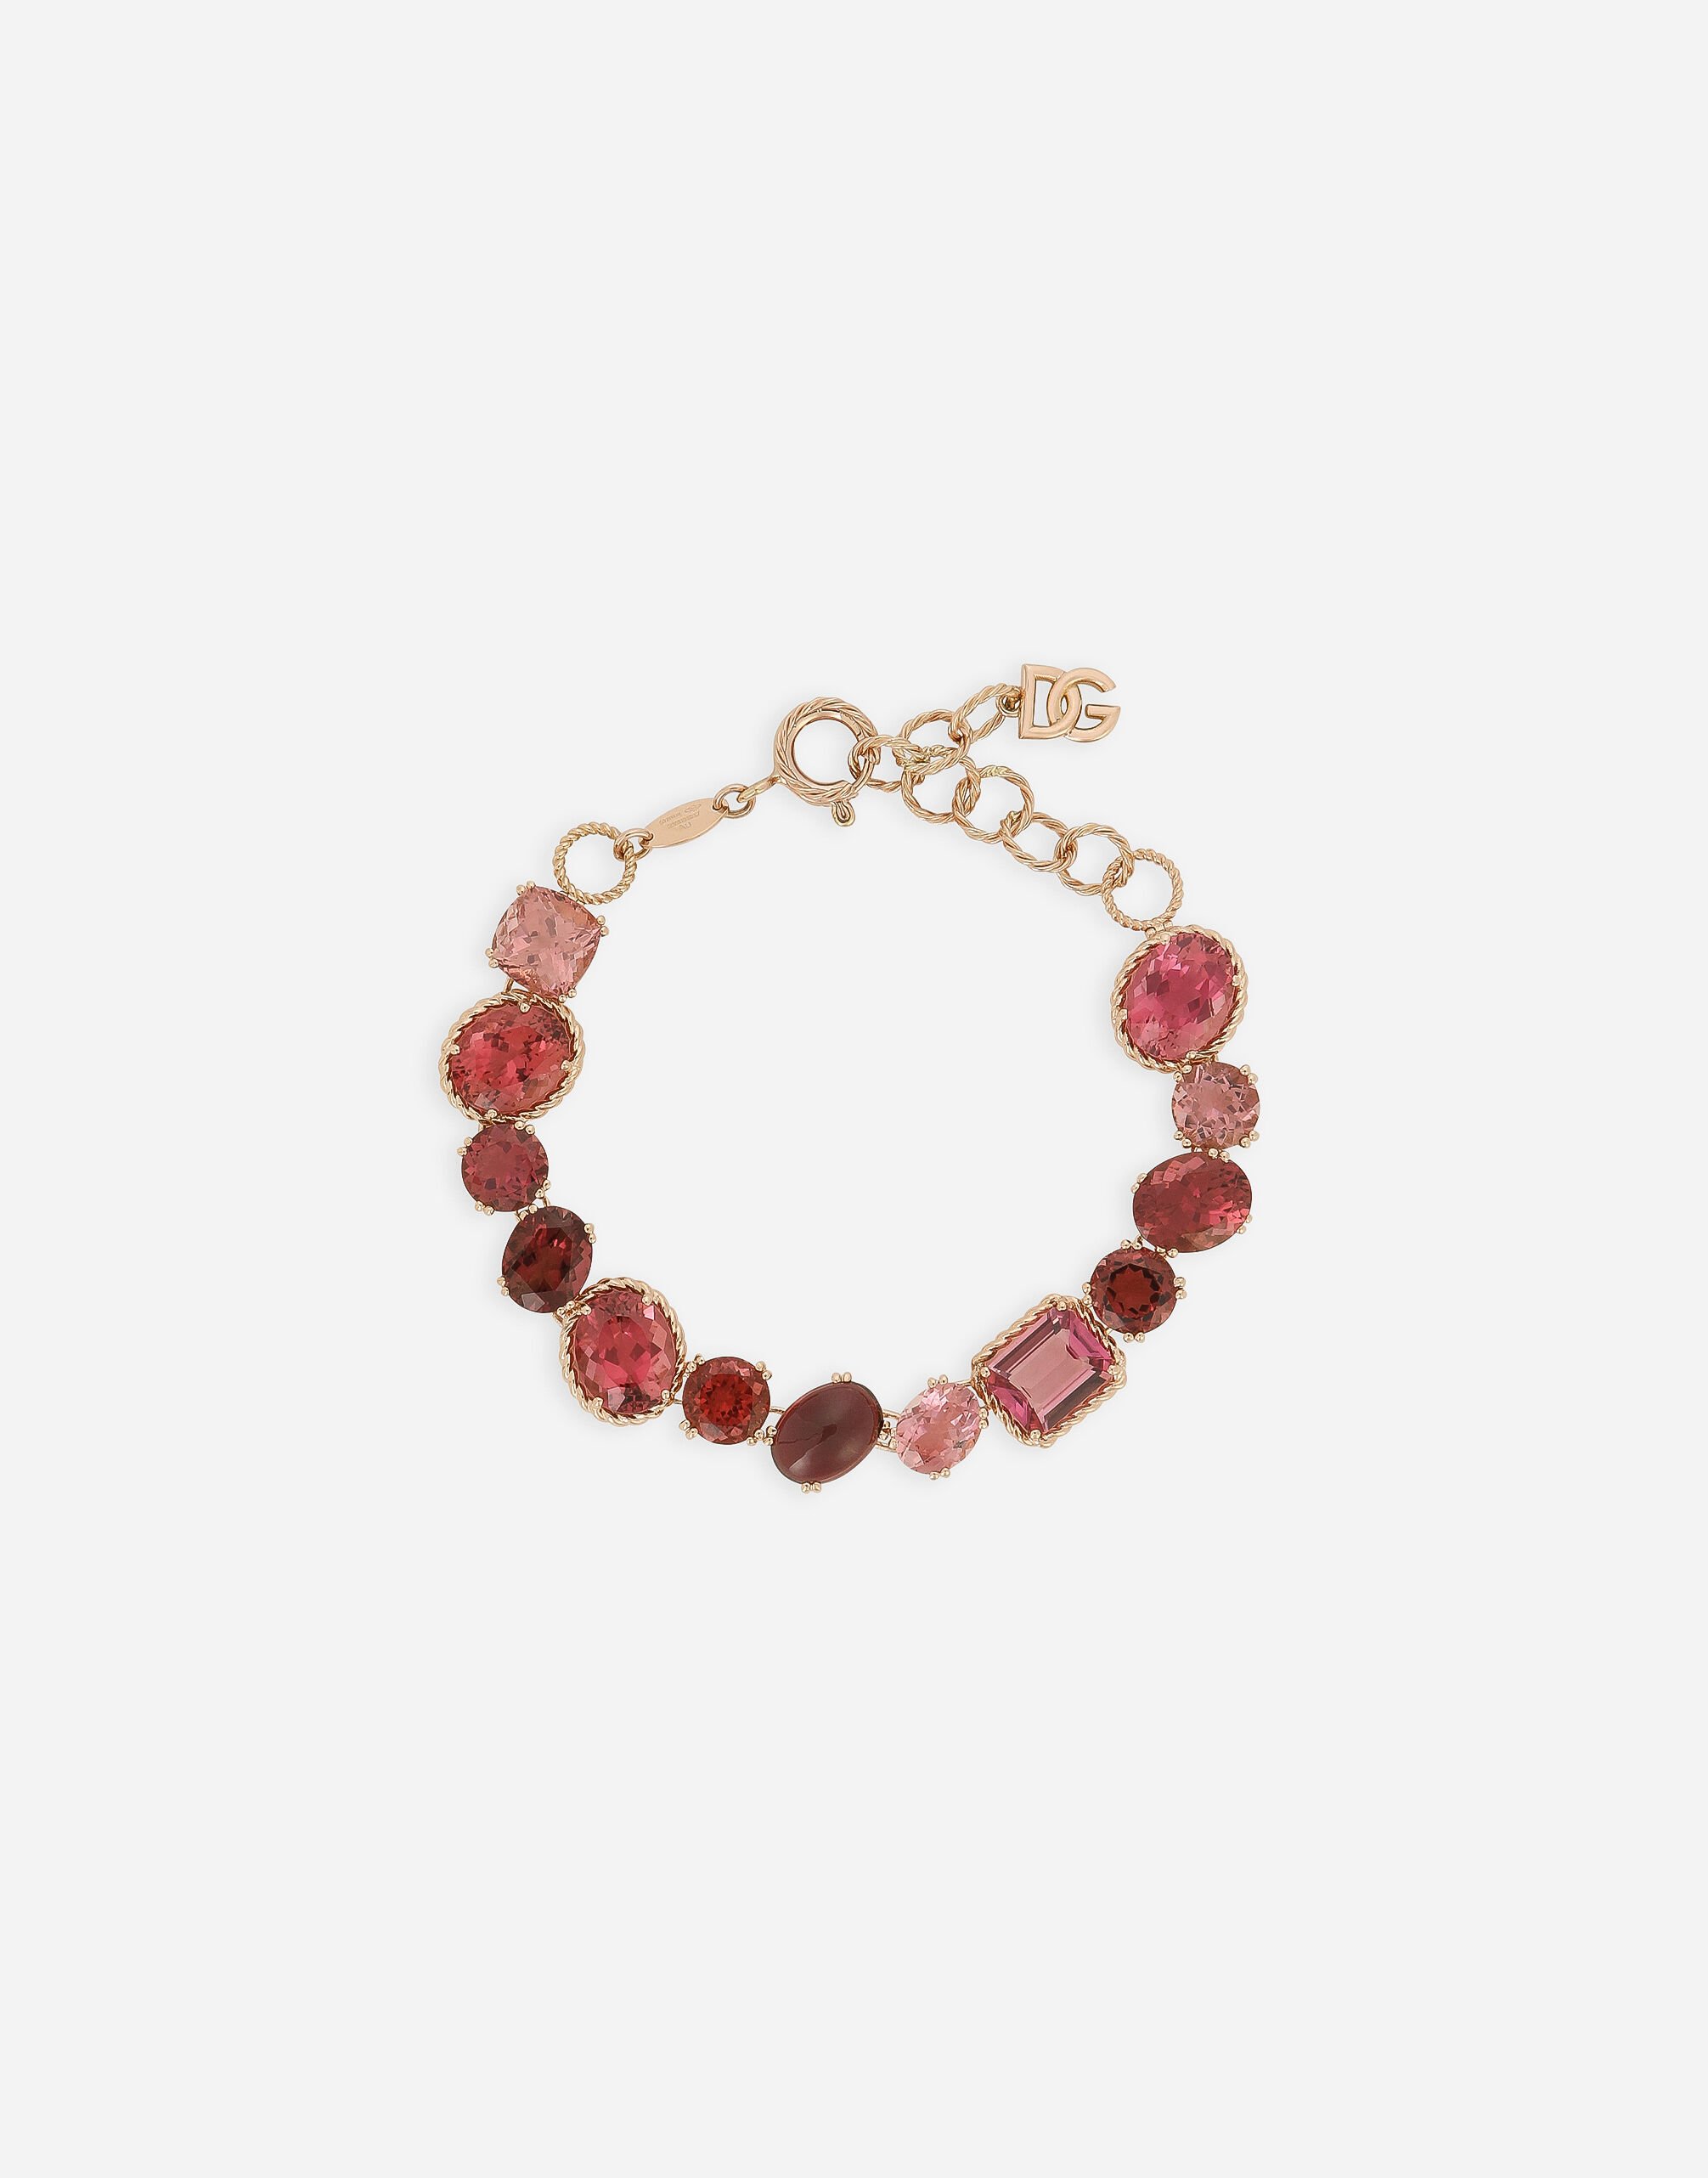 Dolce & Gabbana Anna bracelet in red gold 18kt with toumalines Gold WBQA1GWQC01